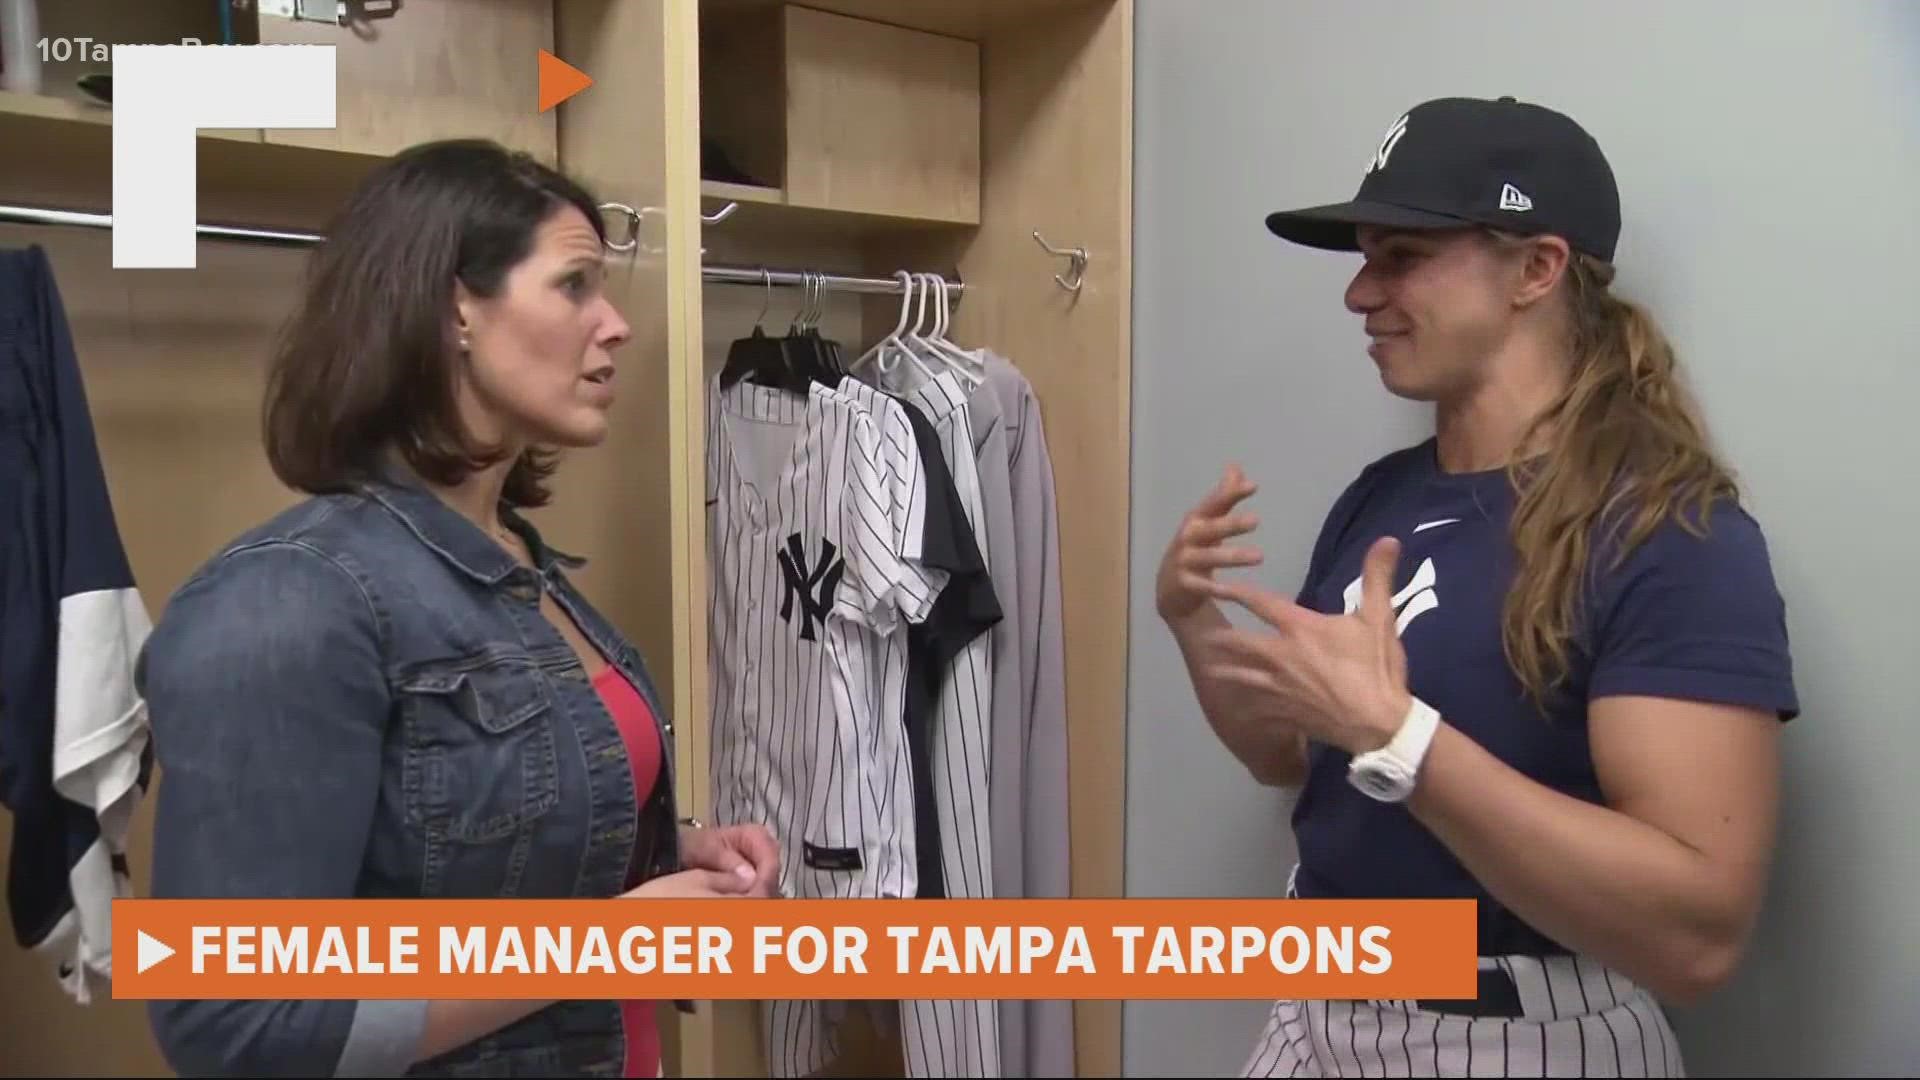 Rachel Balkovec: Tampa Tarpons to have 1st female MiLB manager